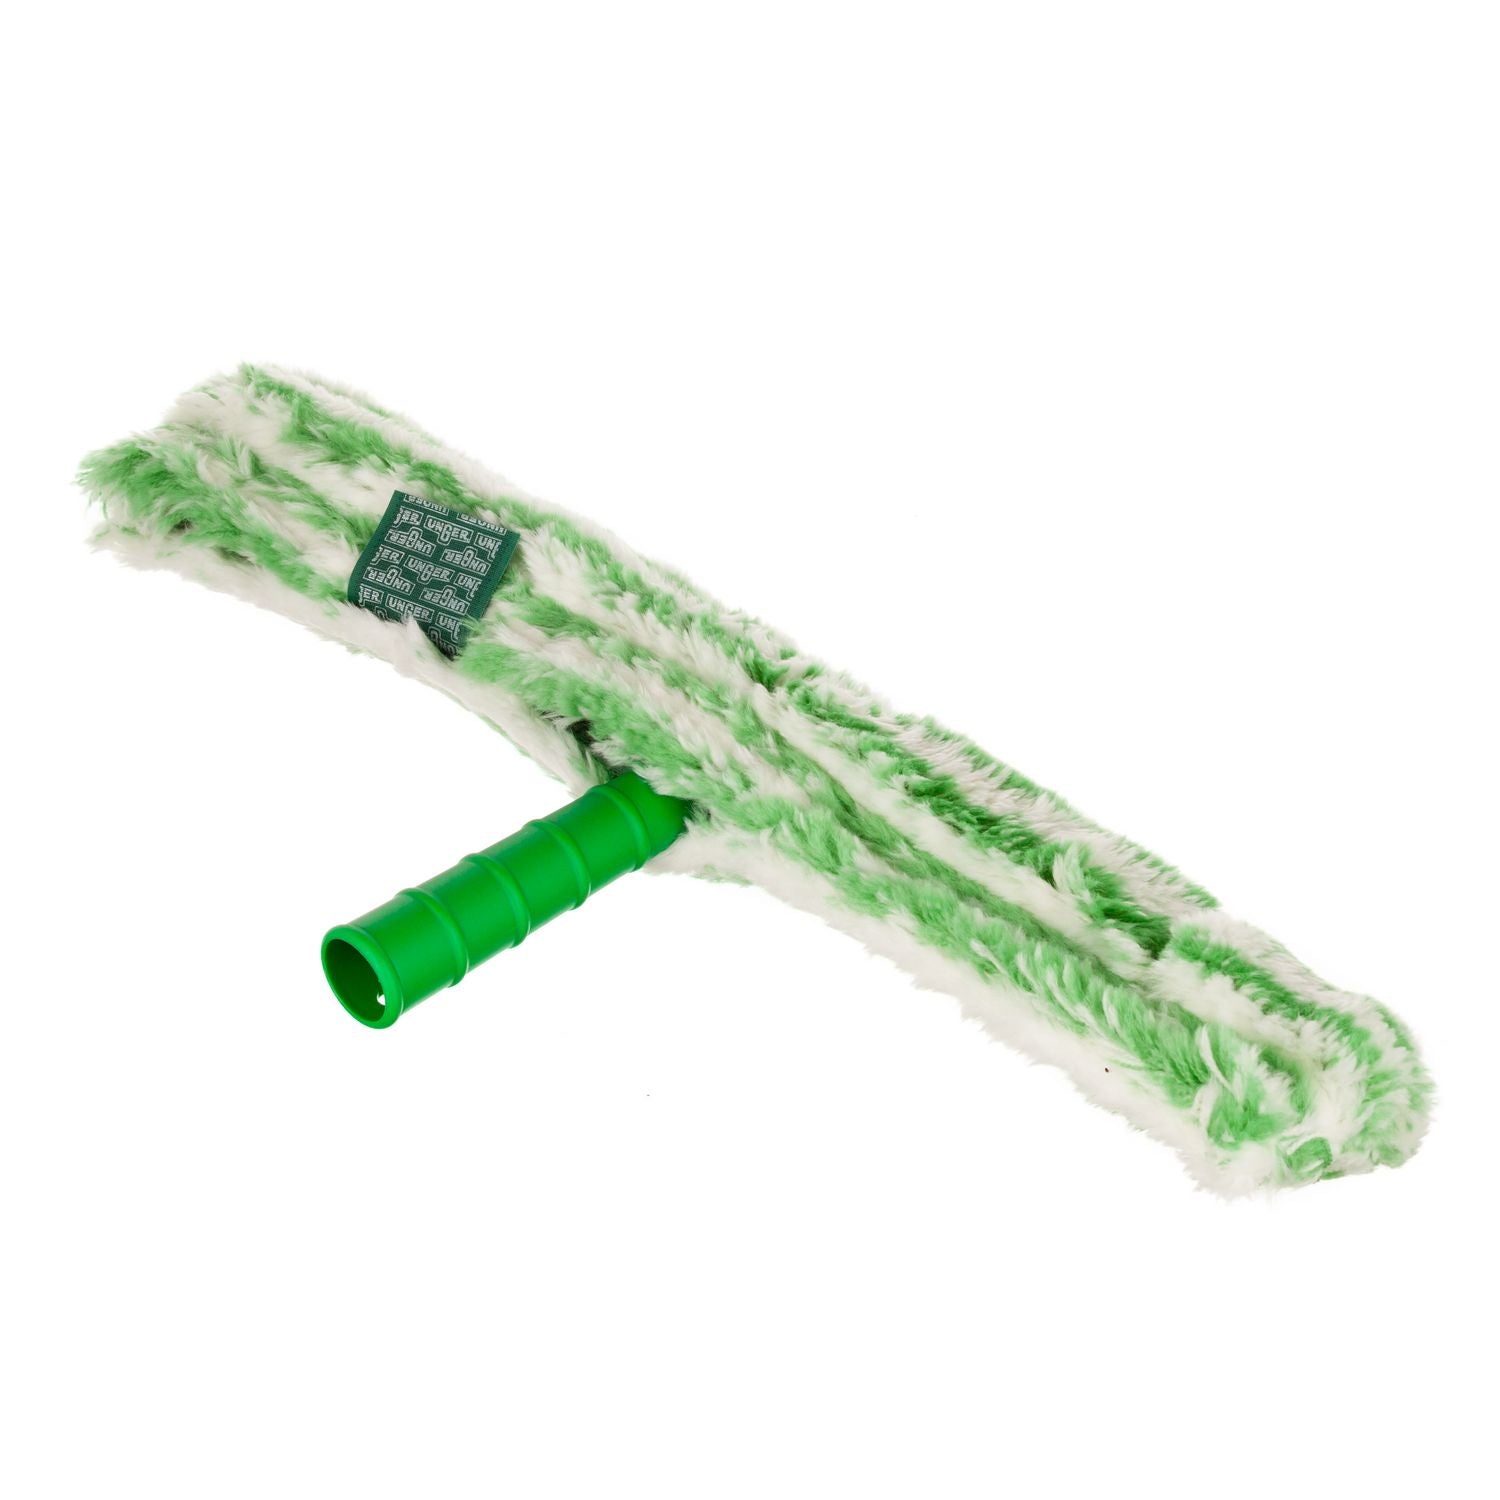 monsoon-plus-stripwasher-complete-with-green-plastic-handle-green-white-sleeve-18-wide-sleeve-10-carton_ungmc450 - 3